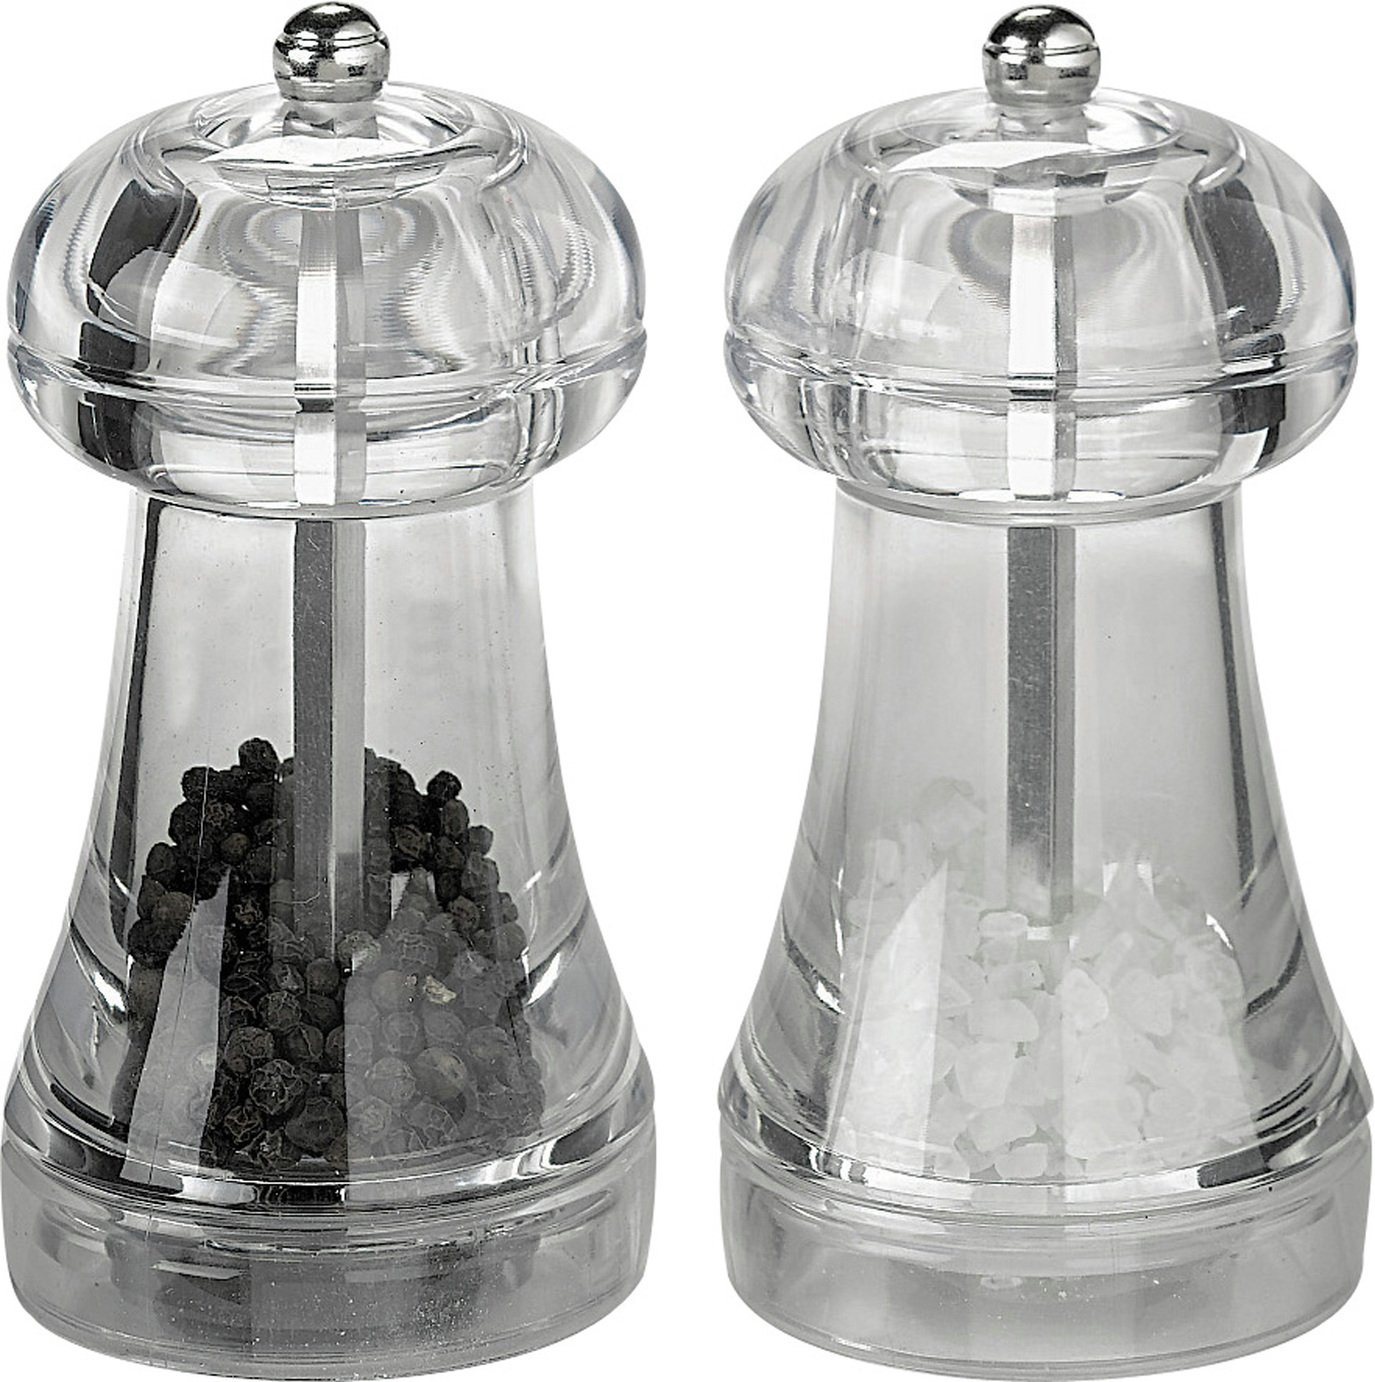 Cole & Mason Everyday Salt and Pepper Mills Review